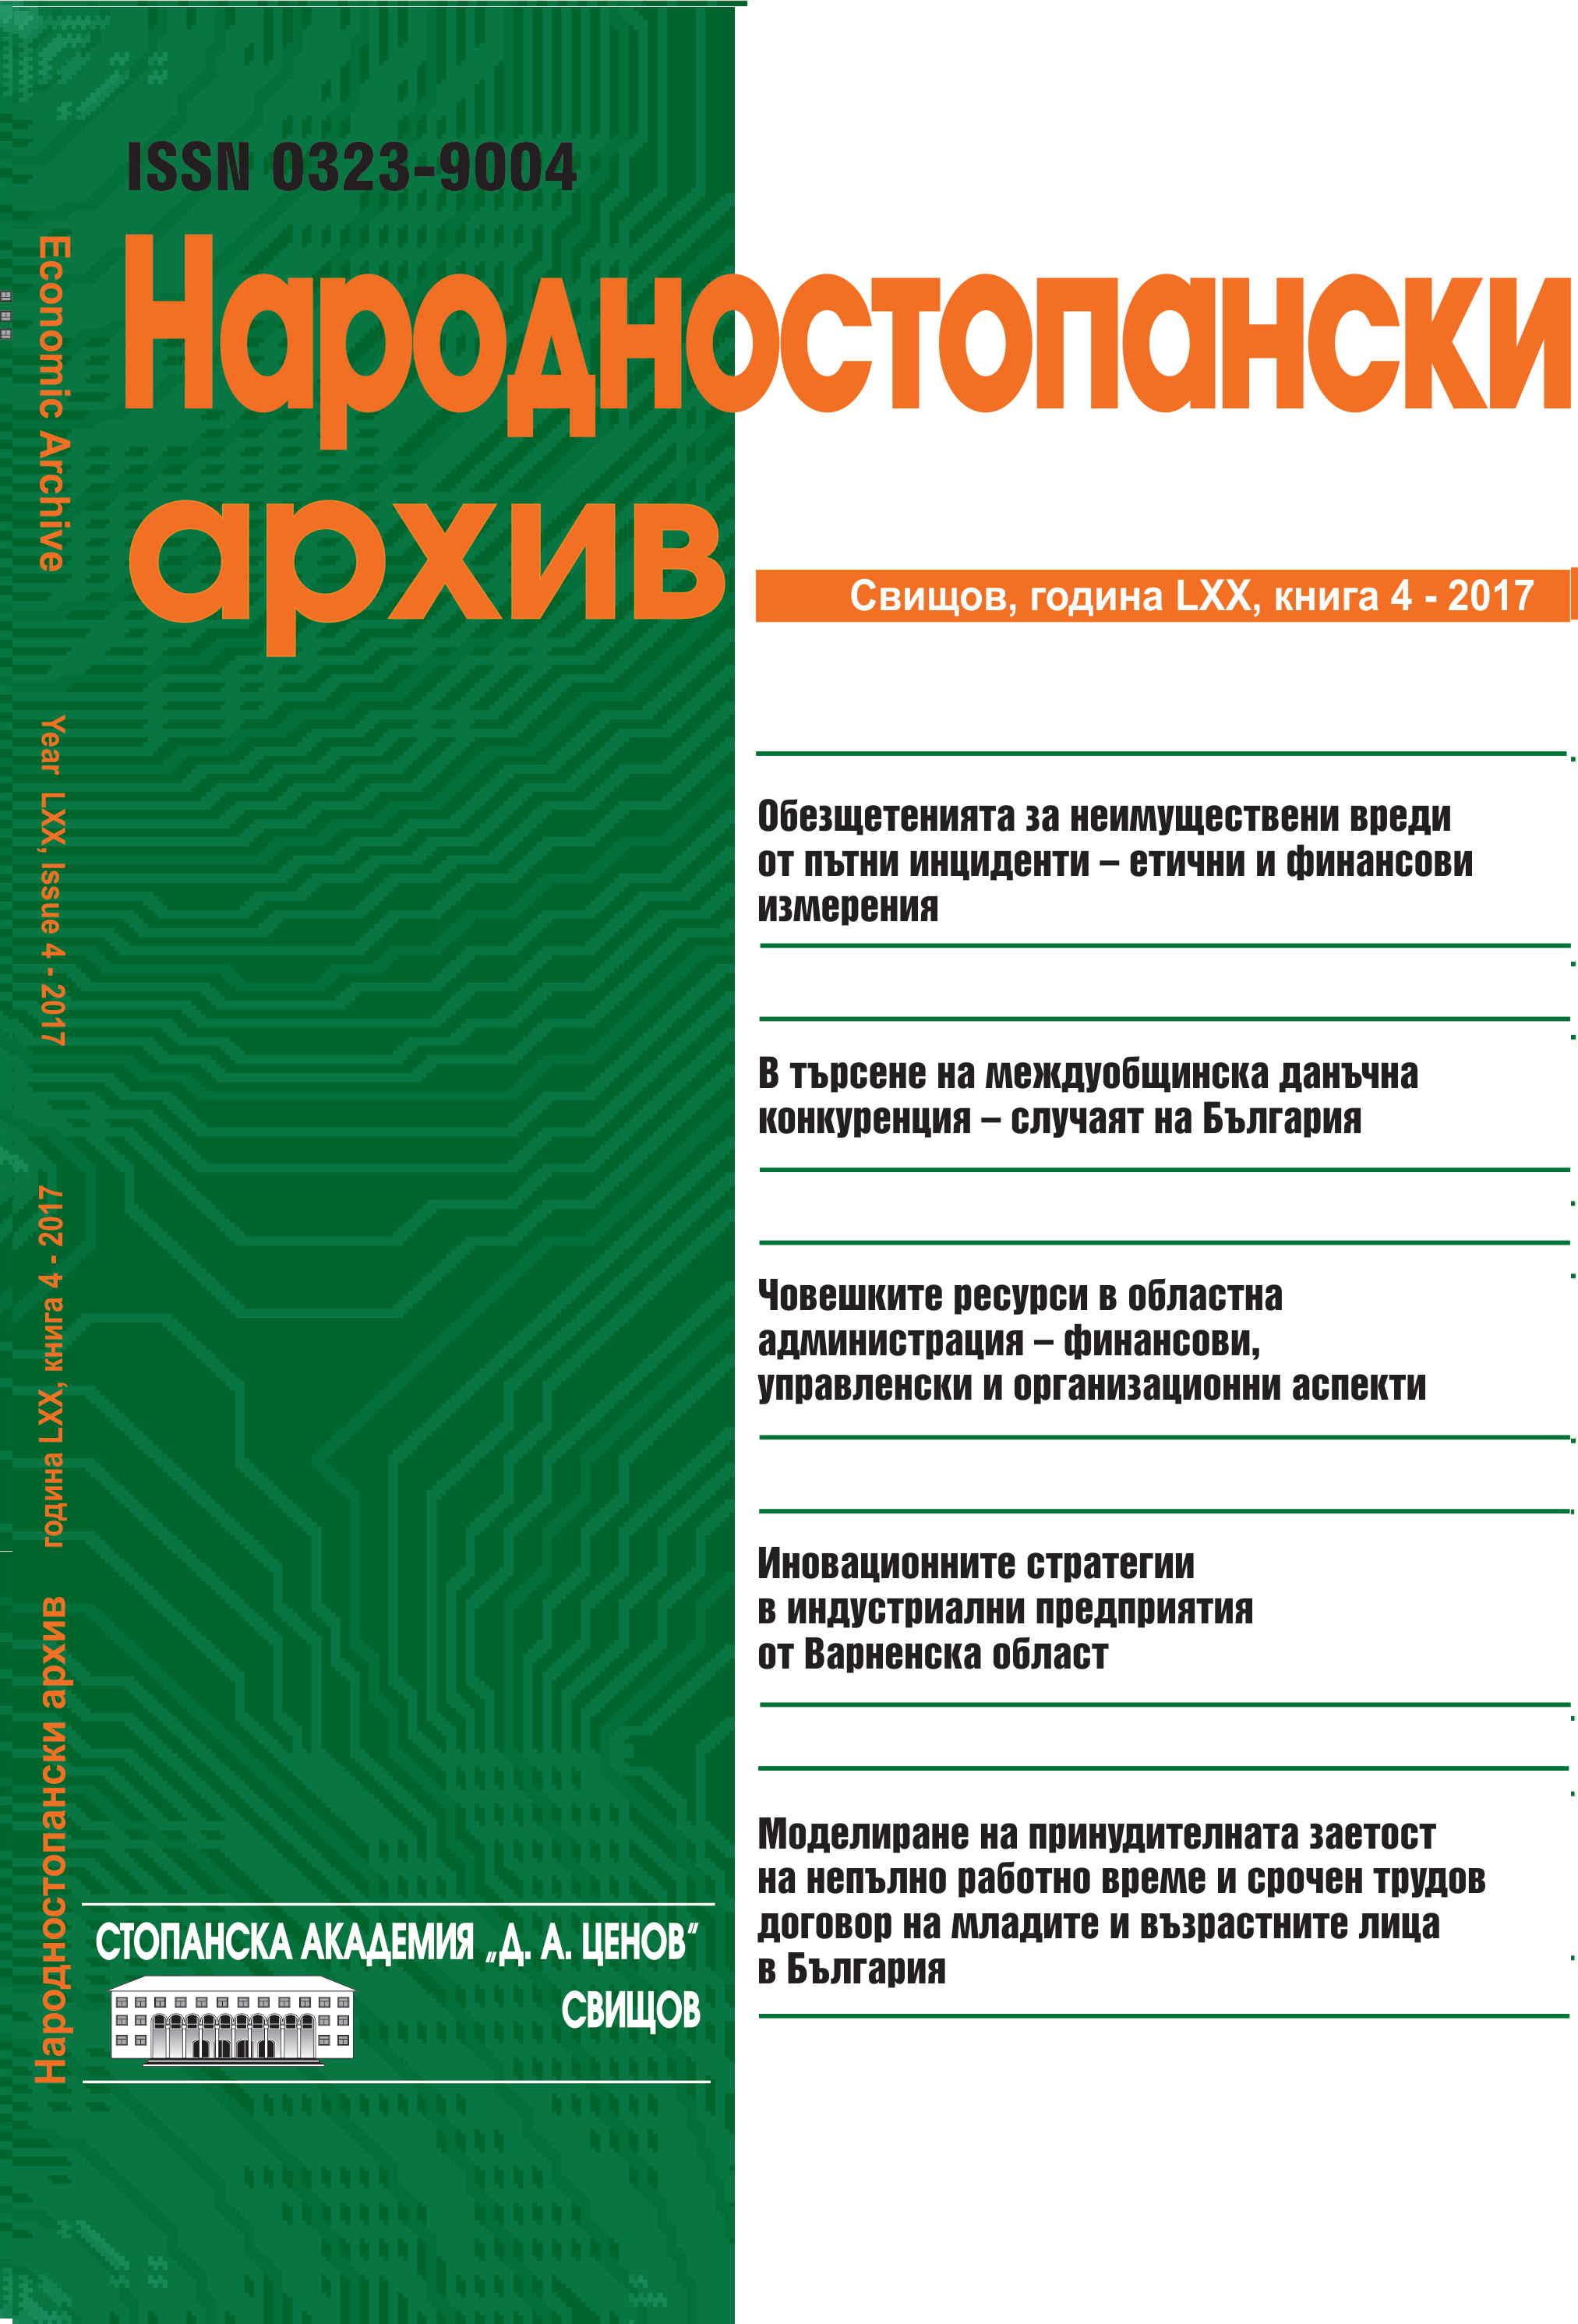 HUMAN RESOURCES IN REGIONAL ADMINISTRATION - FINANCIAL, MANAGEMENT AND ORGANIZATIONAL ASPECTS Cover Image